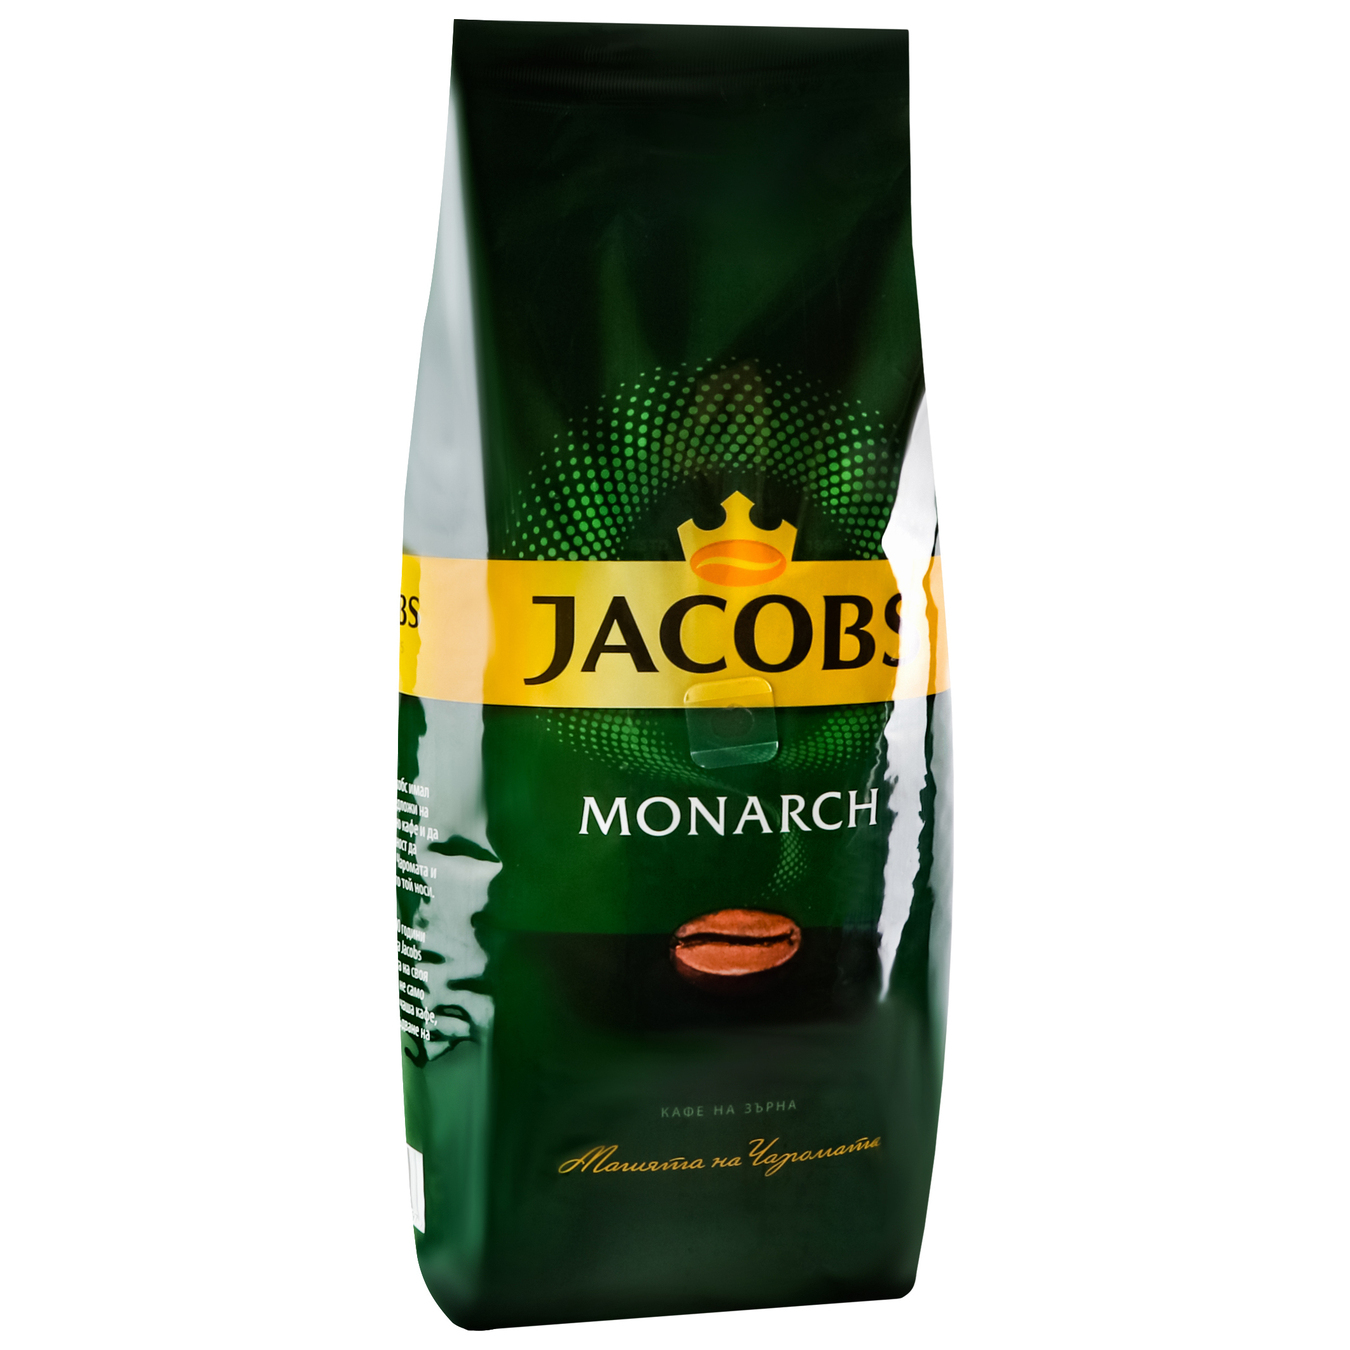 Jacobs Monarch natural coffee roasted in beans 1kg 3